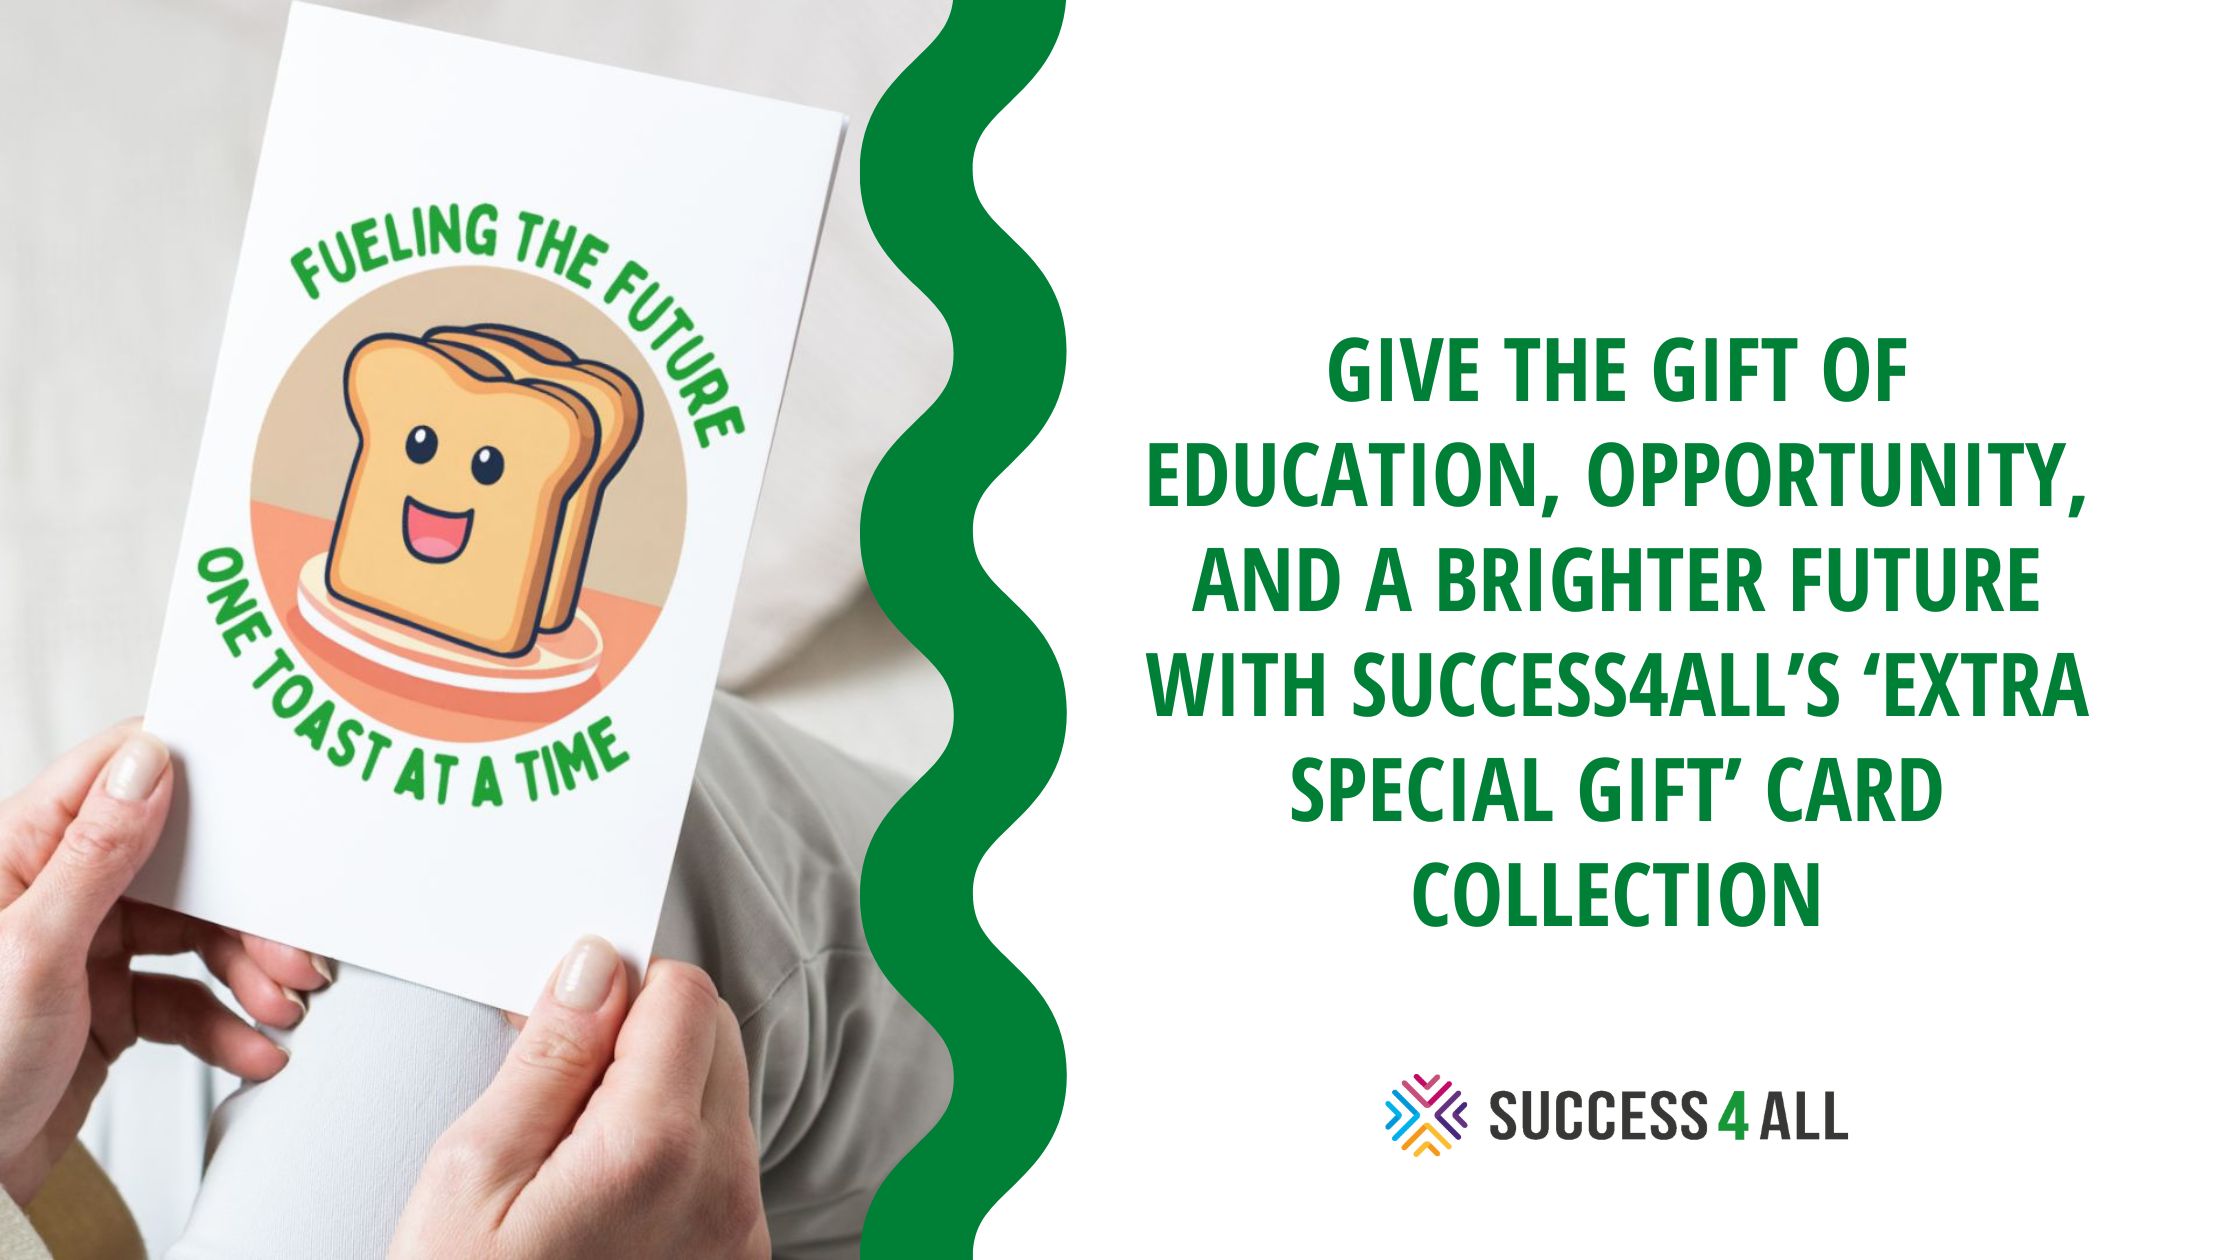 Give the gift of education, opportunity, and a brighter future with Success4All’s ‘Extra Special Gift’ card collection